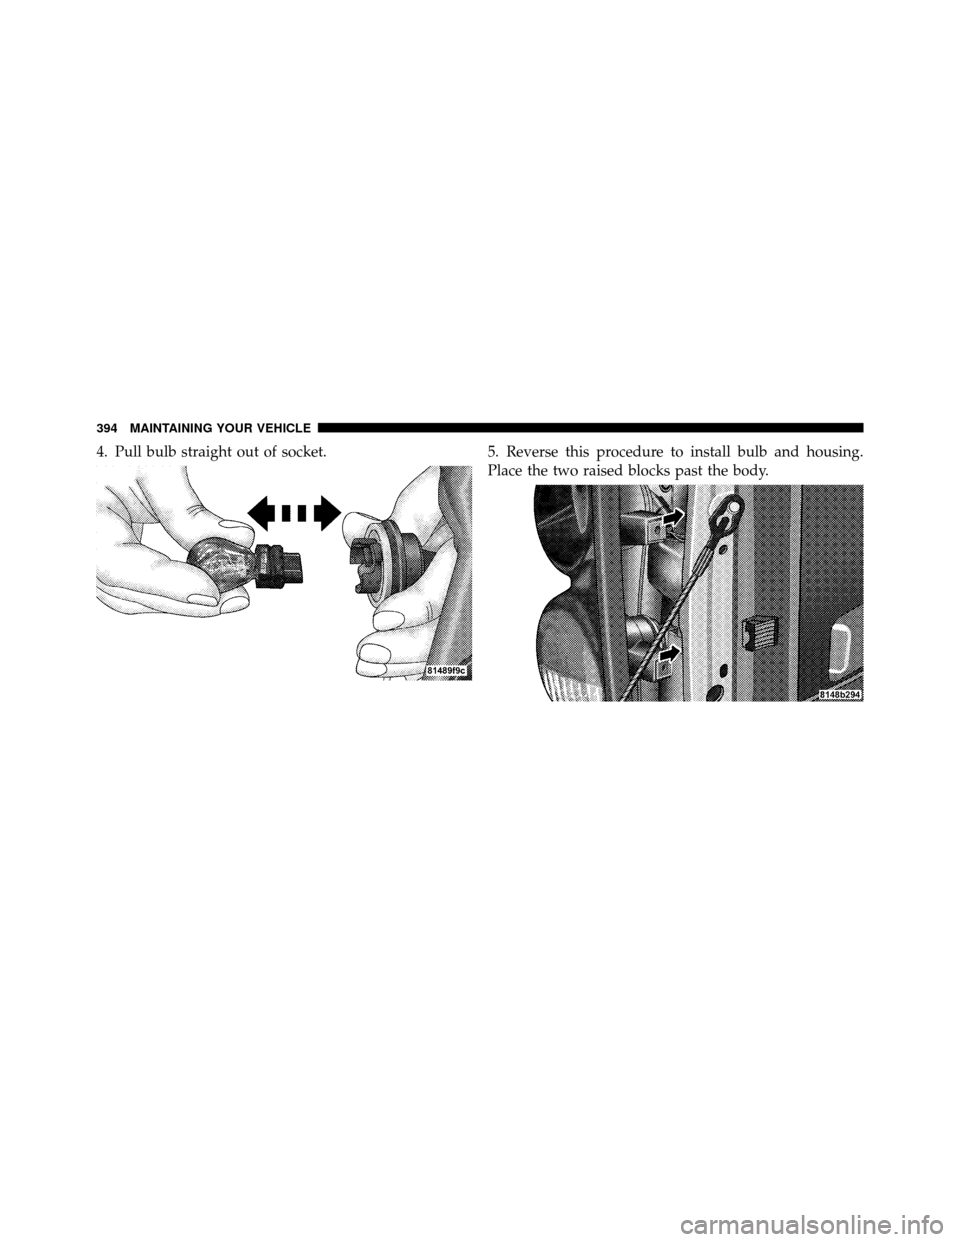 DODGE DAKOTA 2010 3.G User Guide 4. Pull bulb straight out of socket.5. Reverse this procedure to install bulb and housing.
Place the two raised blocks past the body.
394 MAINTAINING YOUR VEHICLE 